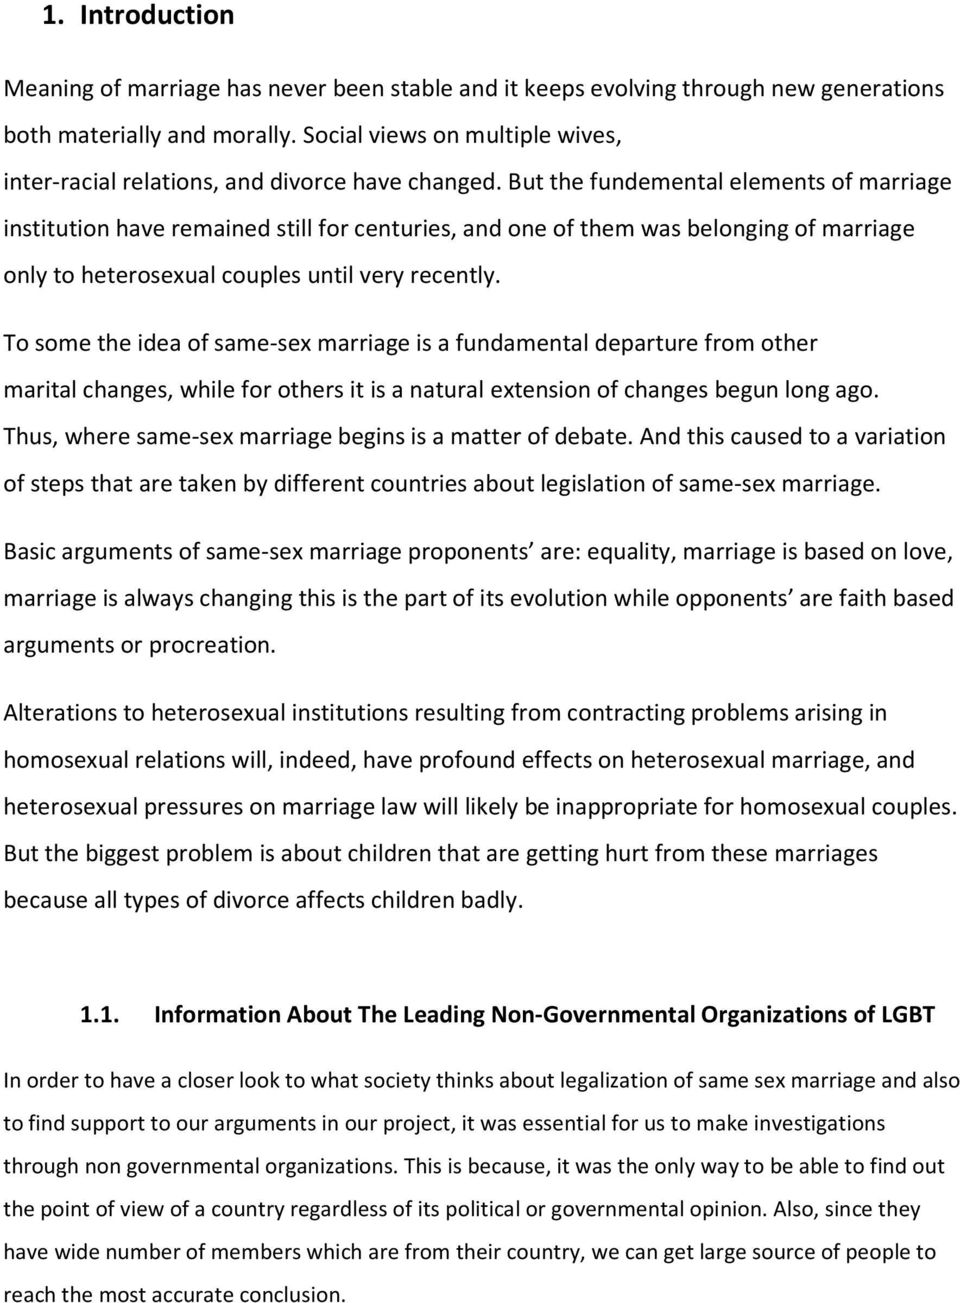 But the fundemental elements of marriage institution have remained still for centuries, and one of them was belonging of marriage only to heterosexual couples until very recently.